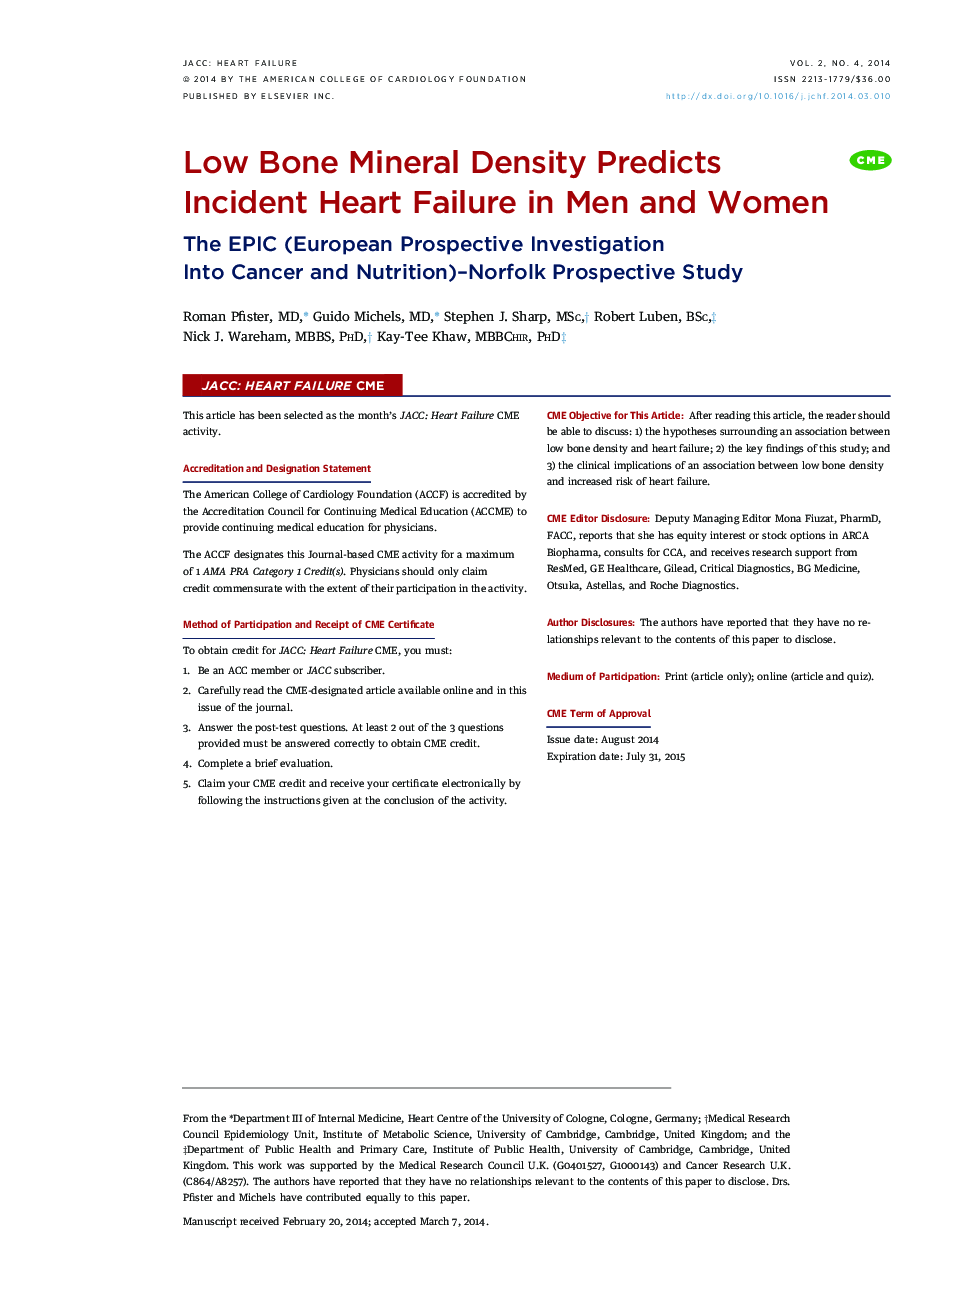 Low Bone Mineral Density Predicts Incident Heart Failure in Men and Women : The EPIC (European Prospective Investigation Into Cancer and Nutrition)–Norfolk Prospective Study